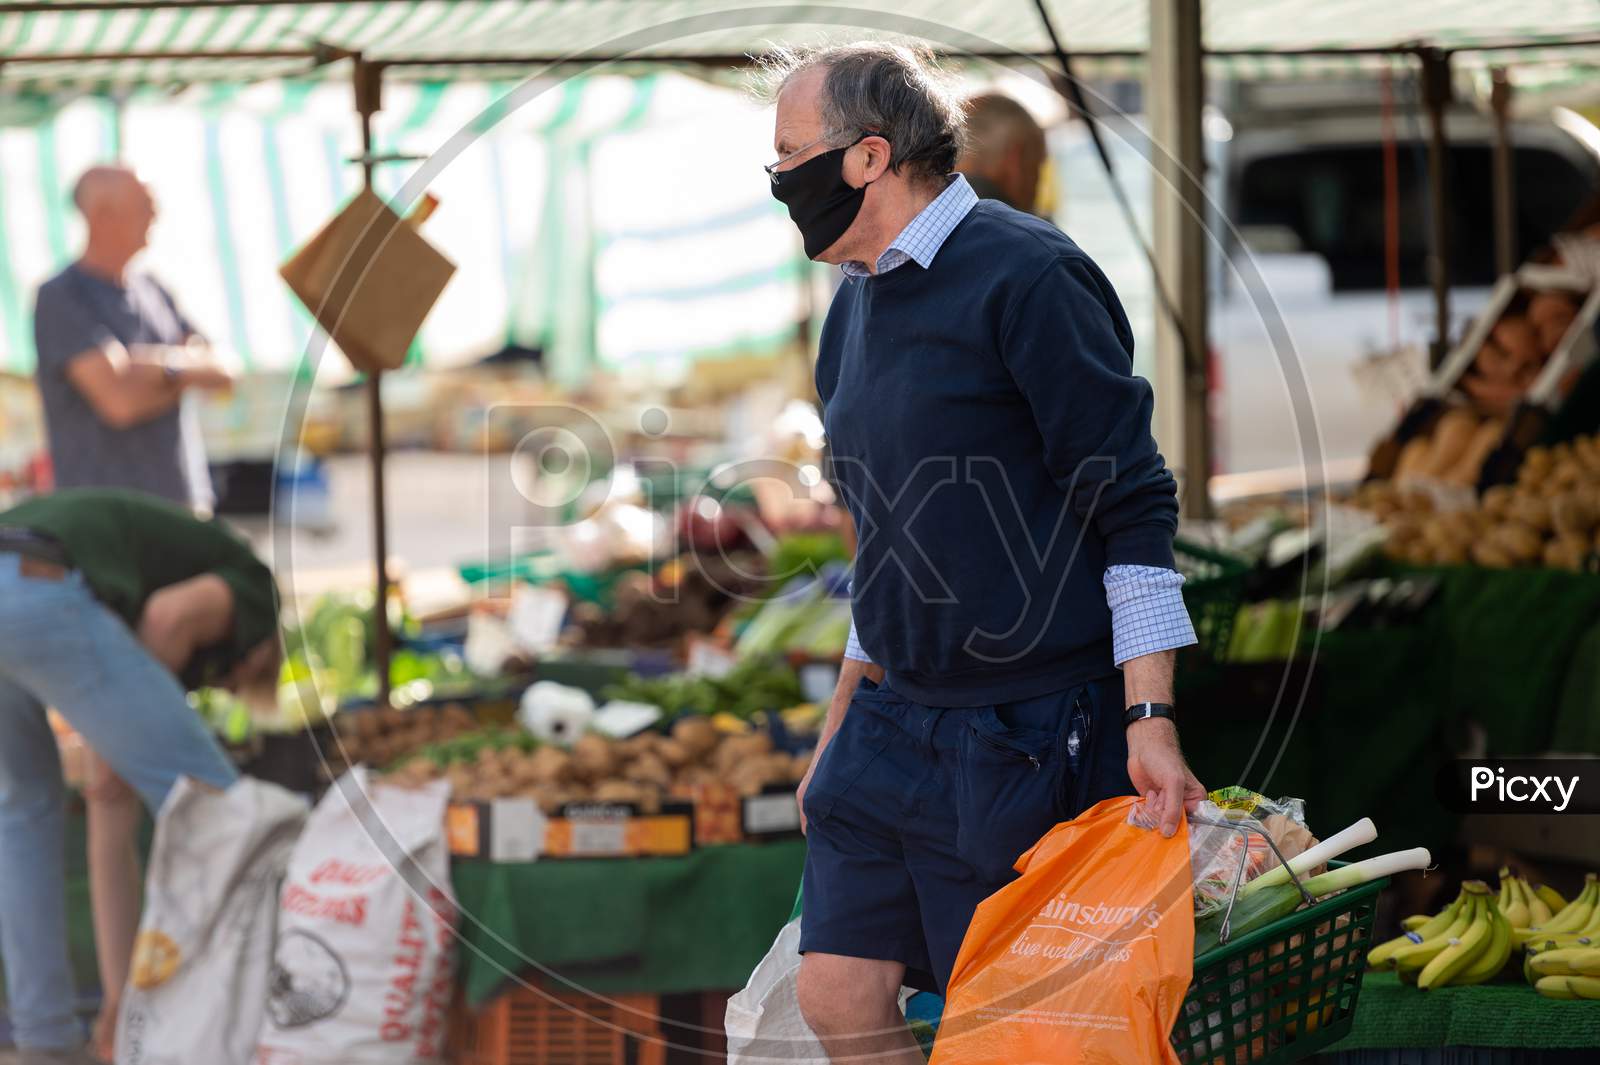 A Mature Man Wearing A Protective Face Mask Carries Shopping At An Outdoor Market